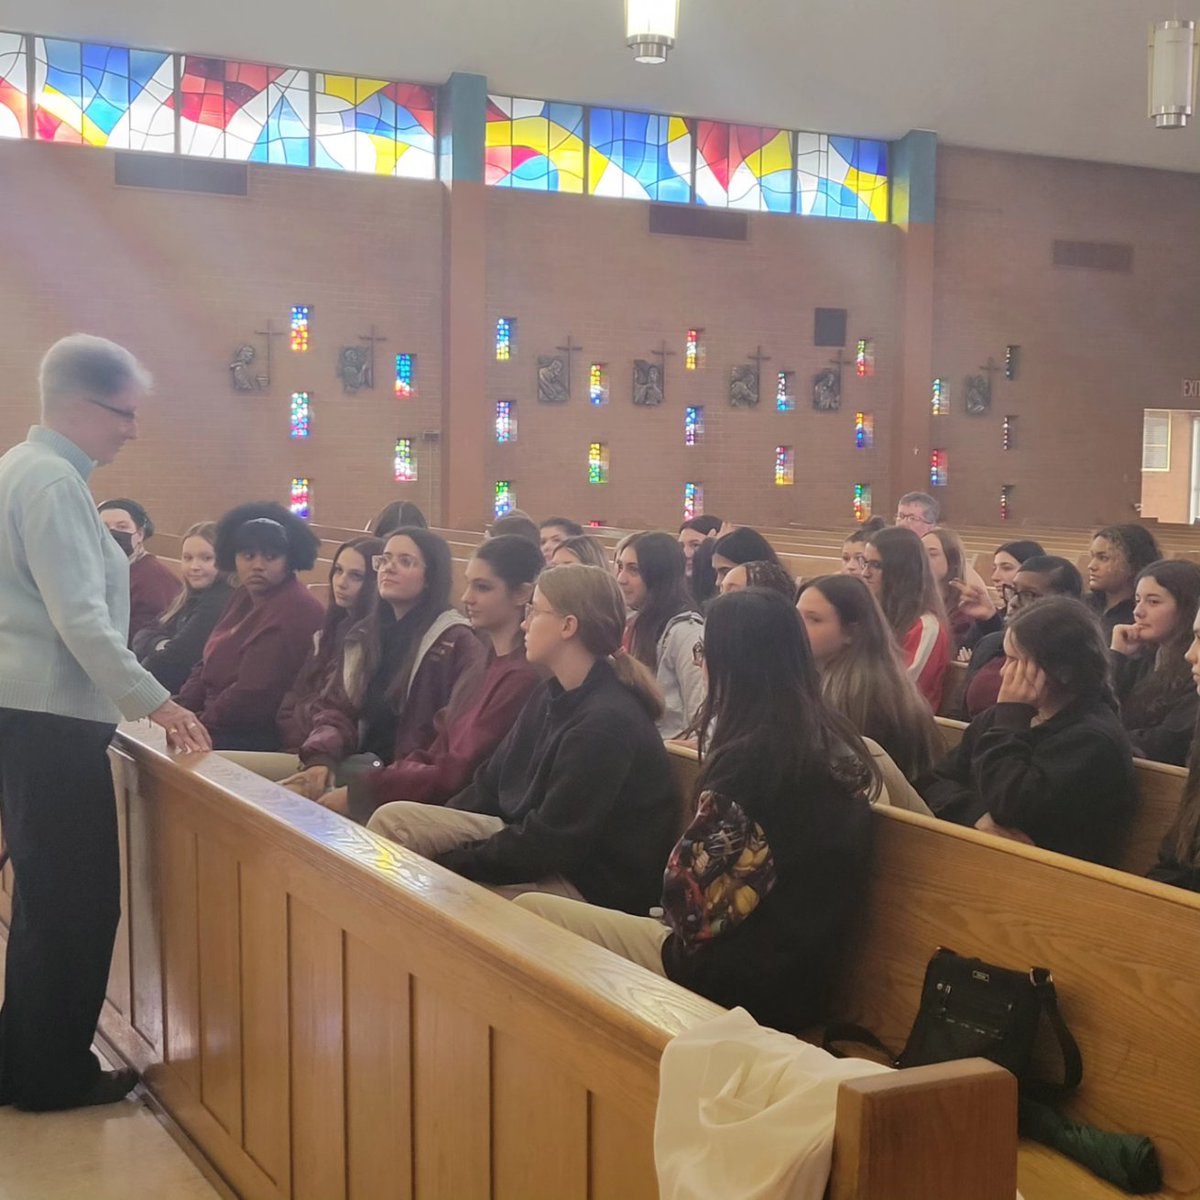 Our junior class spent yesterday on retreat, hearing more about vocations. Thanks to the speakers who, along with our religion faculty, made the experience so meaningful: 
Mr. & Mrs. Fox
Fr. Adam Potter, Chaplain
Sr. Valerie Zottola, Sister of St. Joseph, Vocations Director